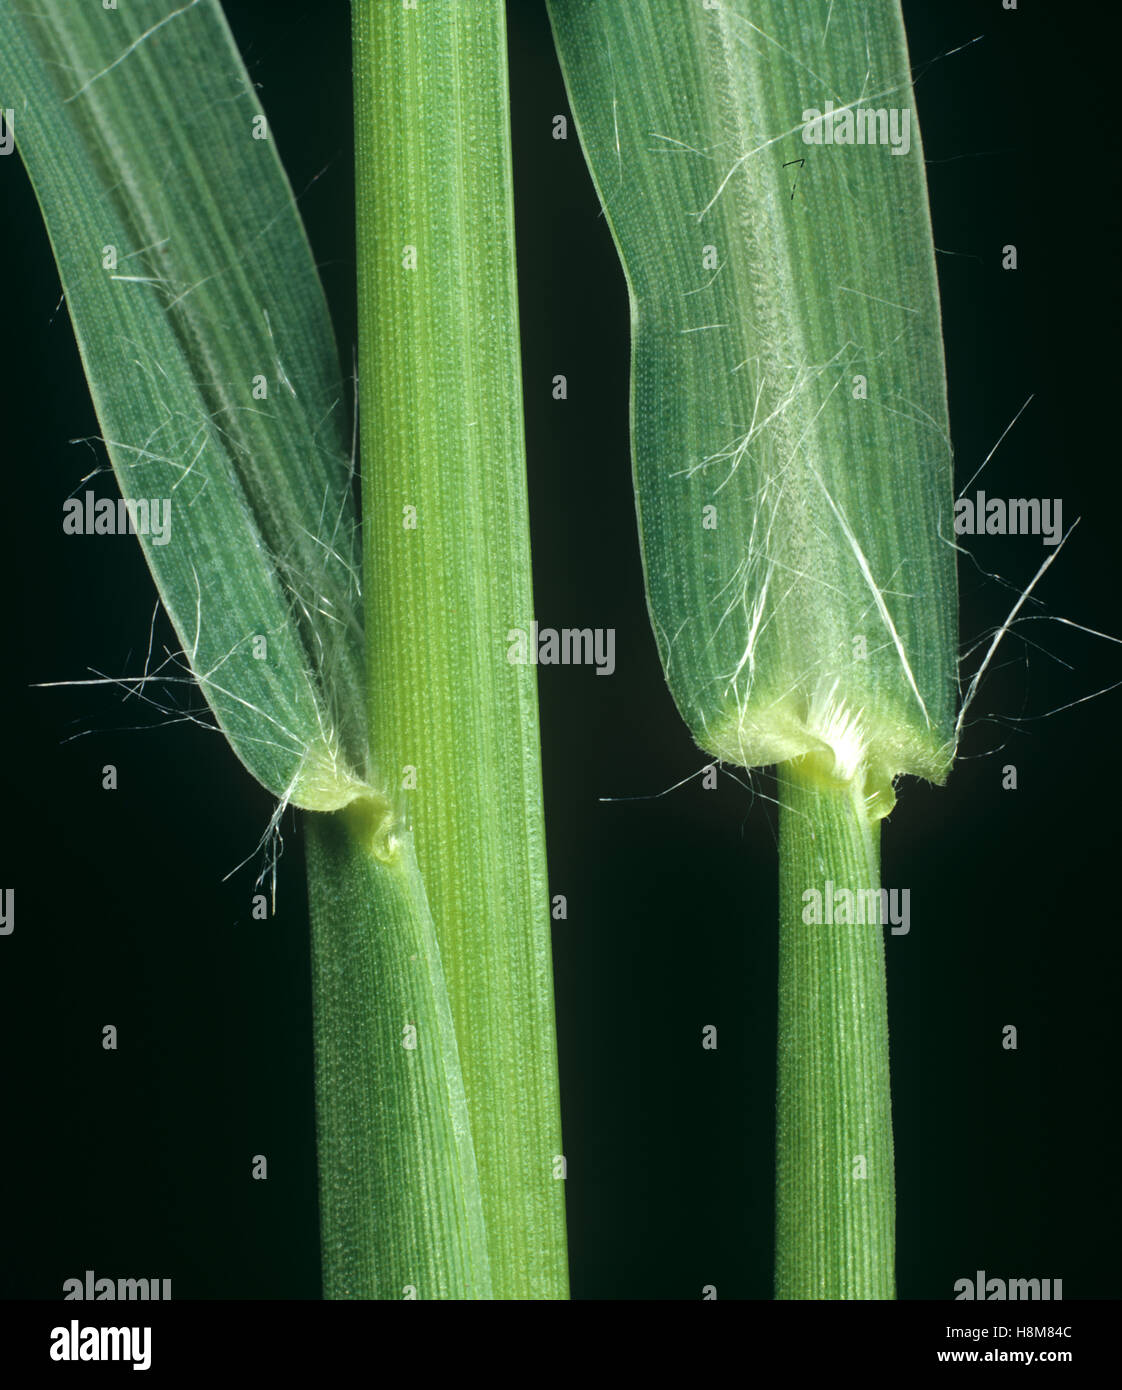 Pearl millet, Pennisetum glaucum, leaf ligule at the node and leafstalk of an agricultural grass weed Stock Photo